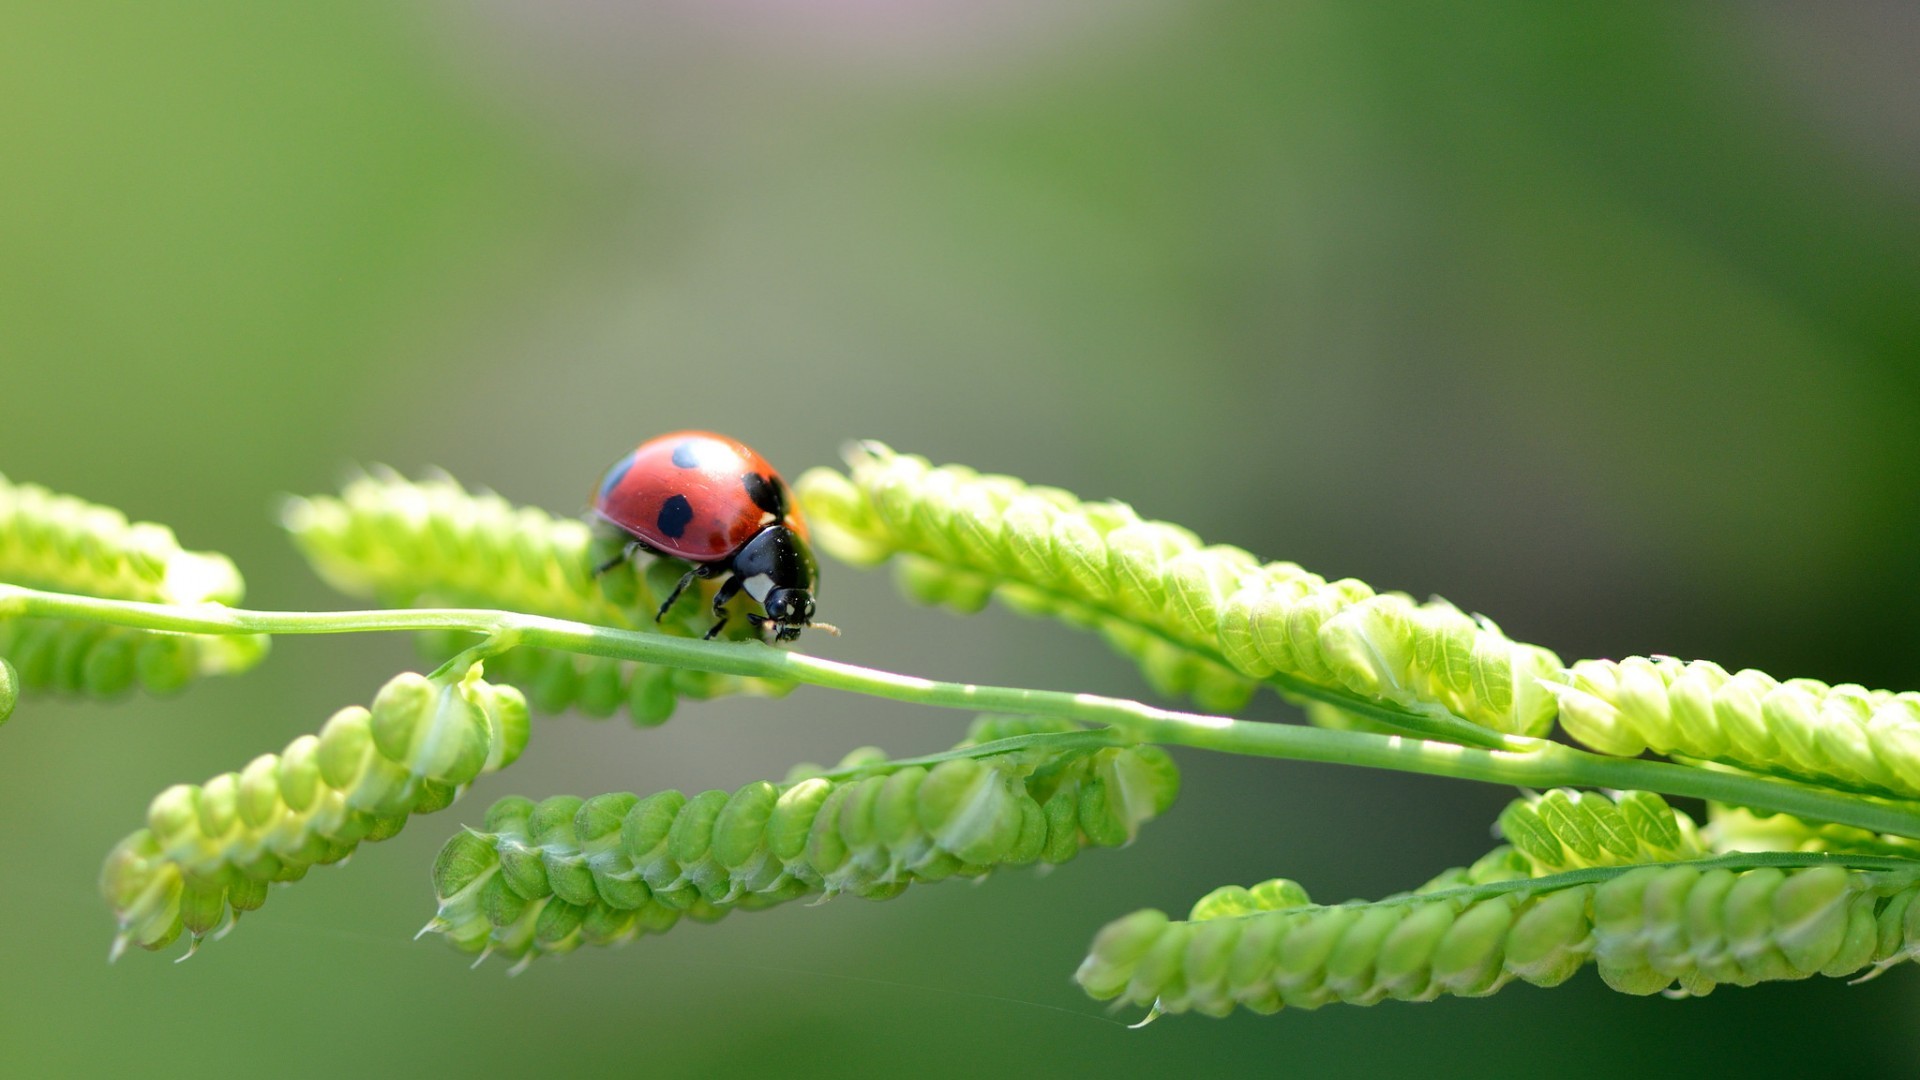 General 1920x1080 ladybugs plants nature insect animals green background closeup macro